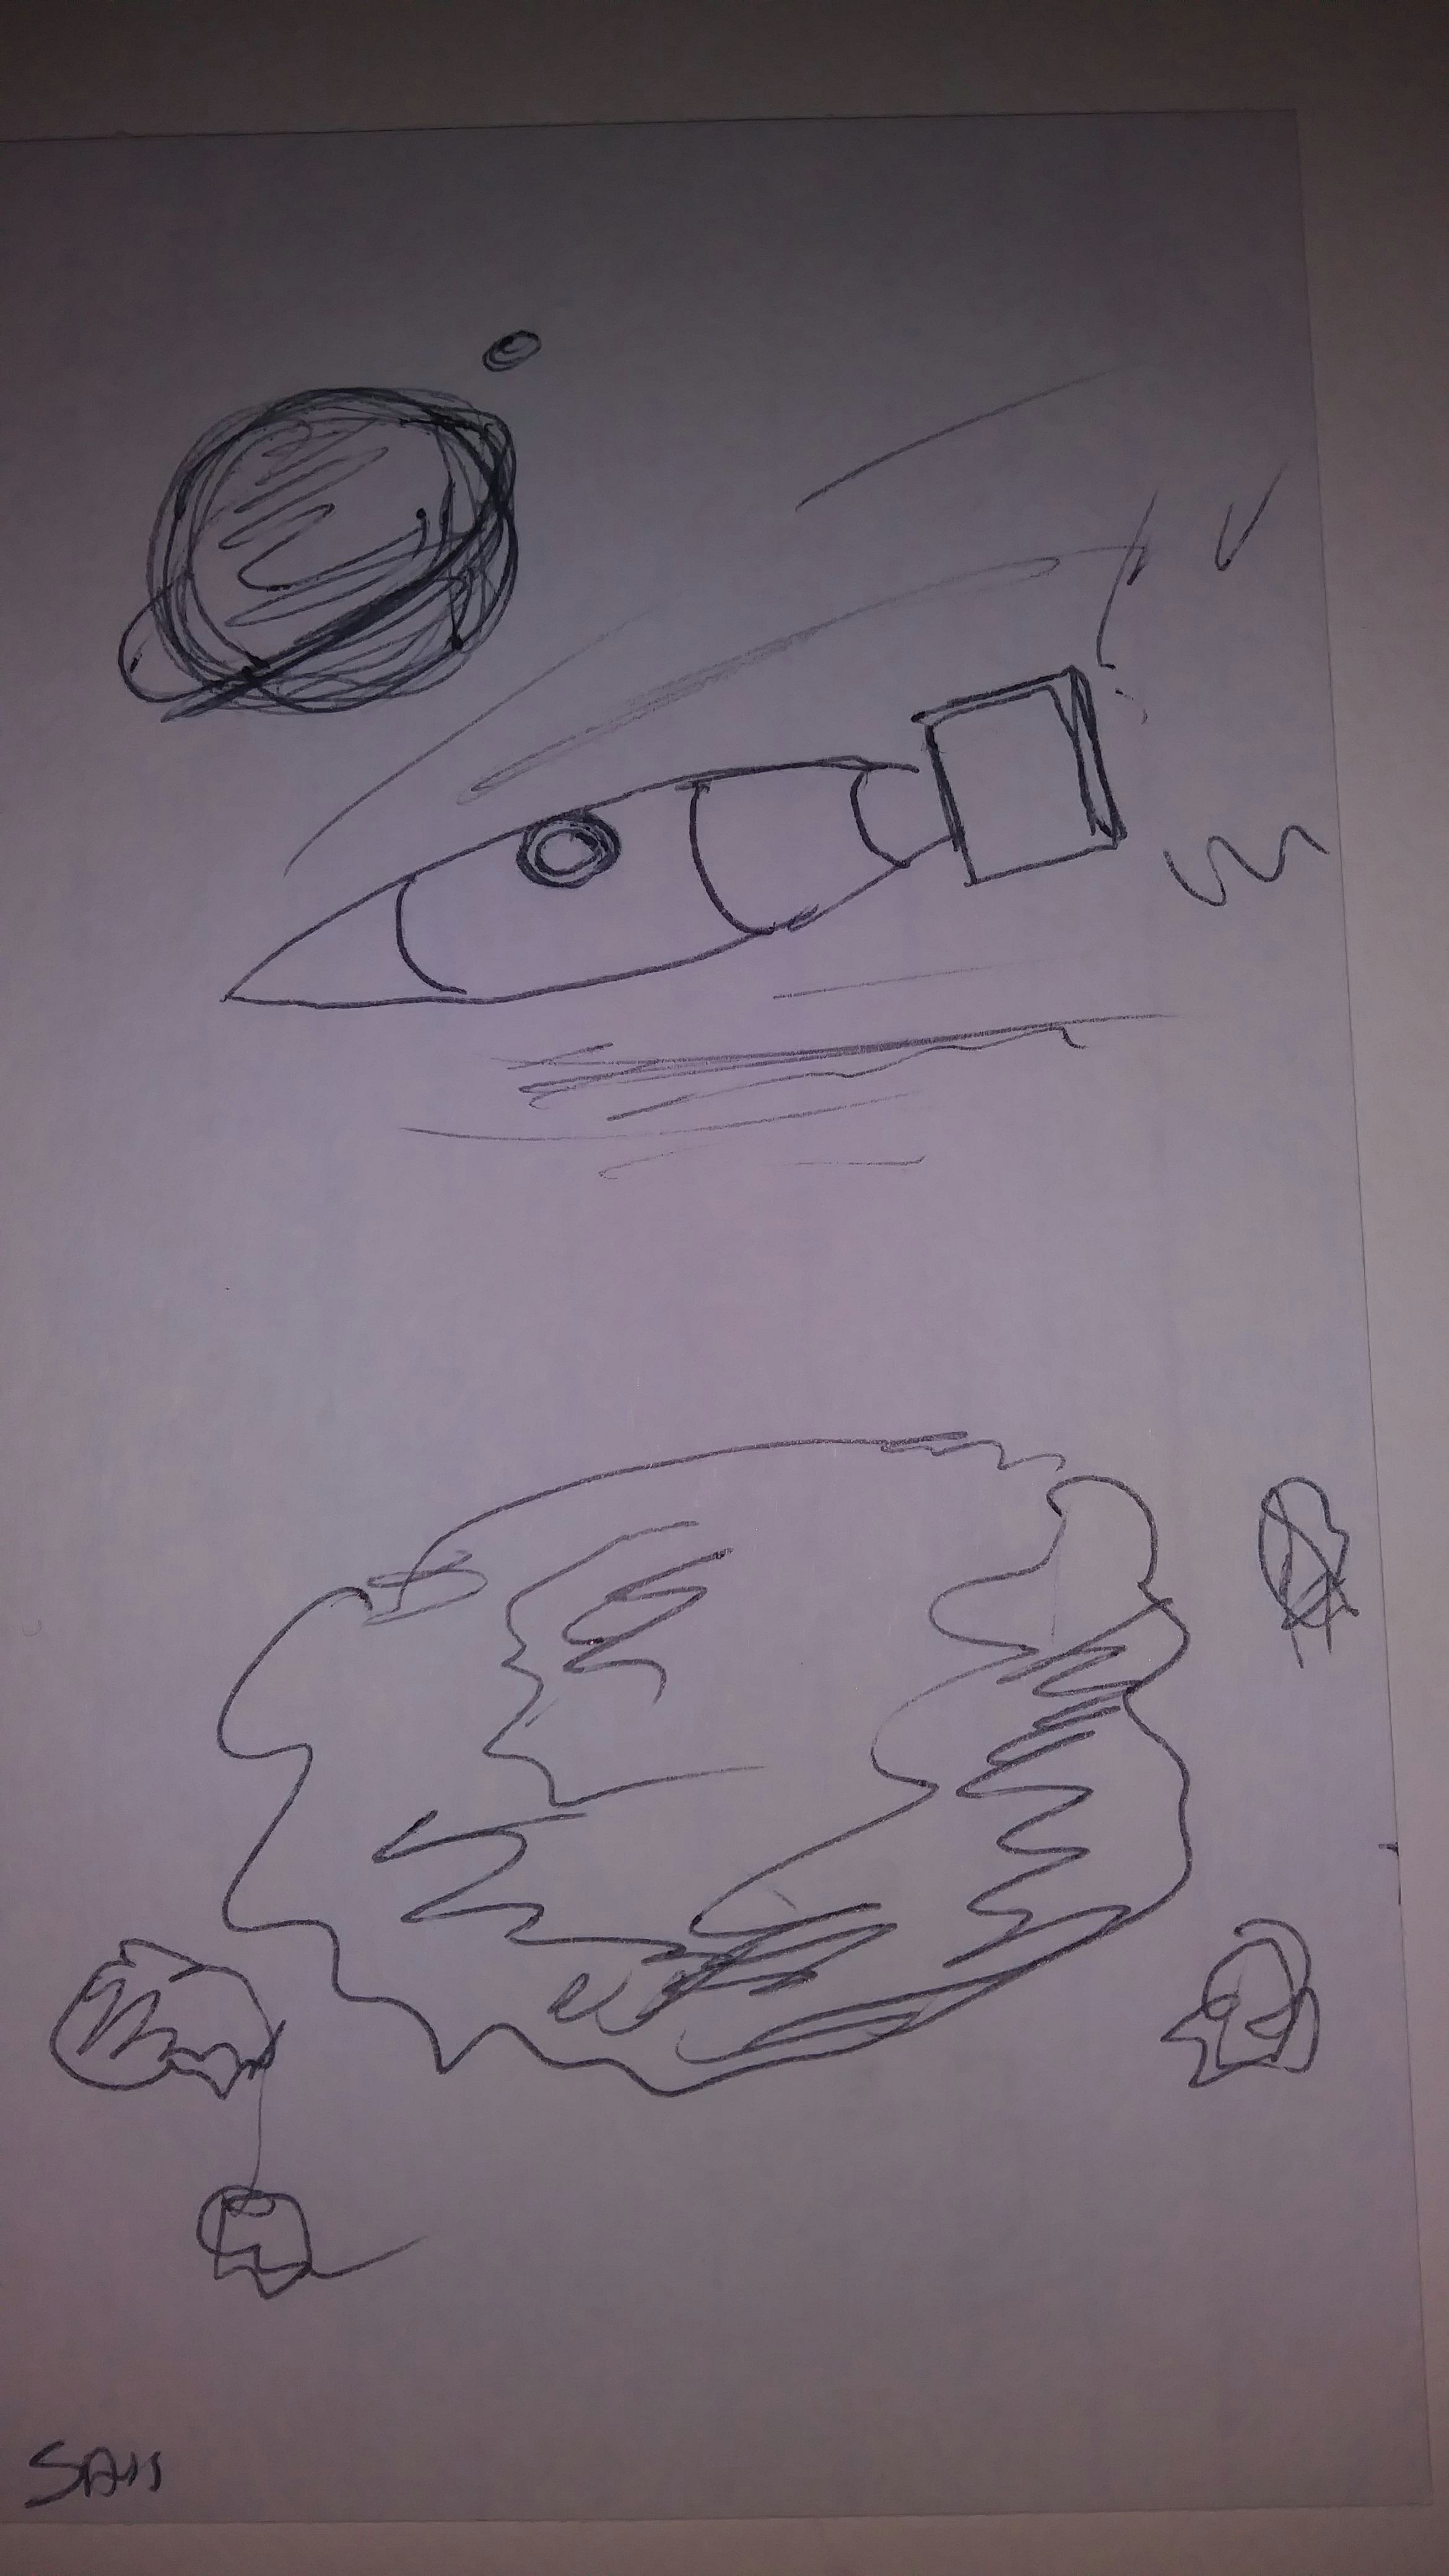 Drawing A Cartoon Rocket 6 29 2018 Rocket Ship In Space Going Past A Ringed Planet and